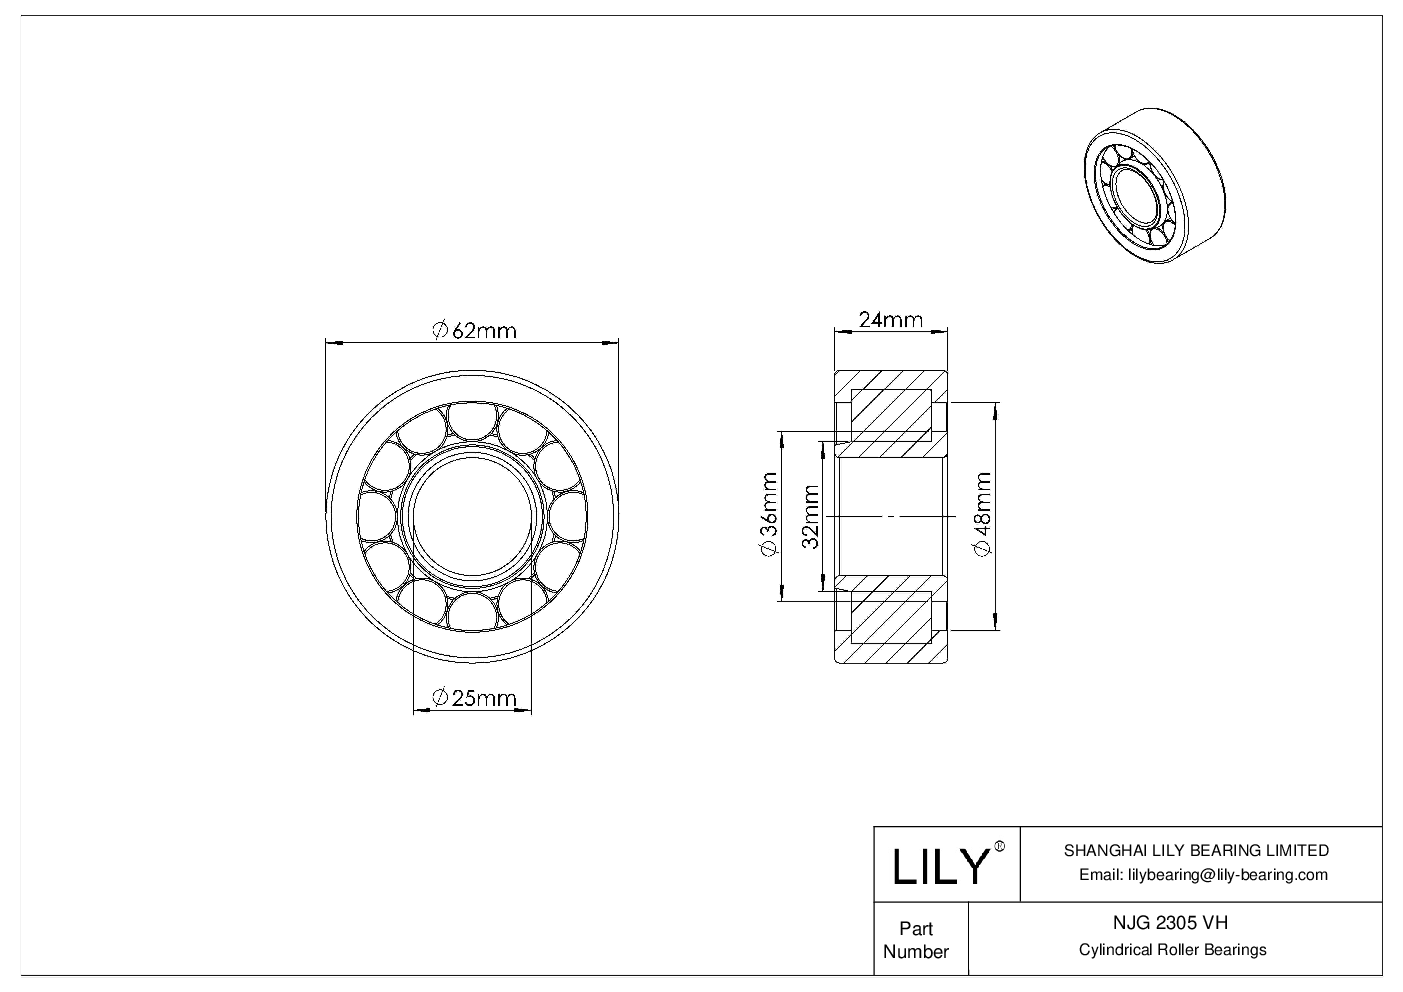 NJG 2305 VH Single Row Full Complement Cylindrical Roller Bearings cad drawing